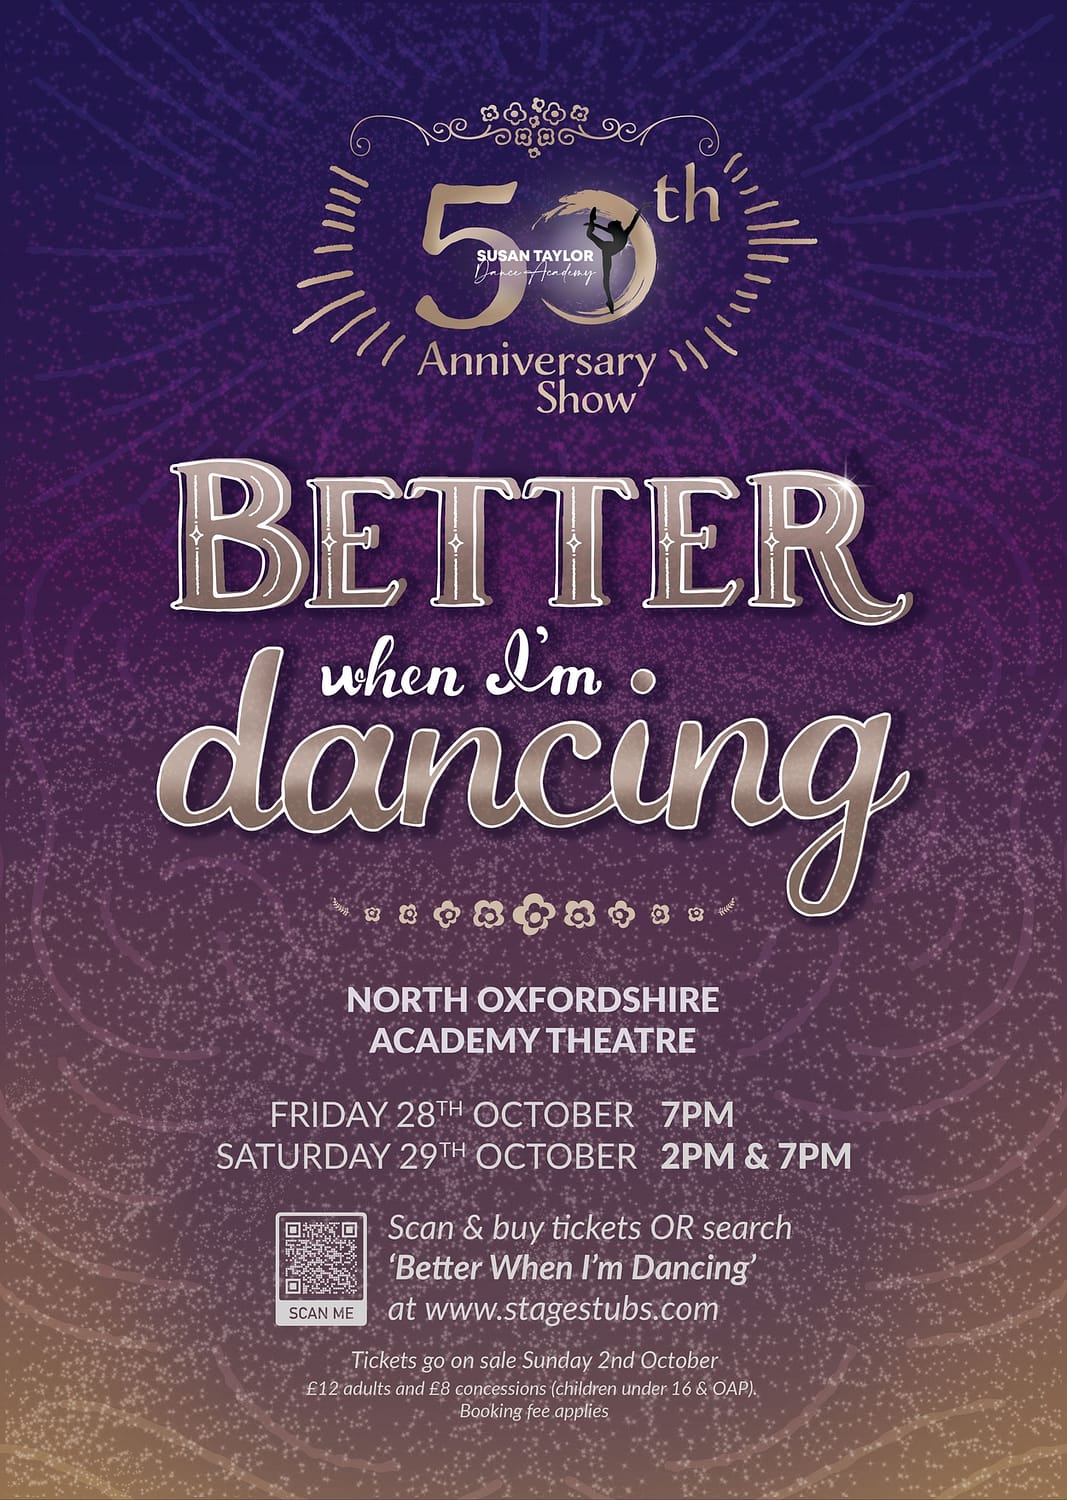 Better when I'm dancing 50th anniversary show poster design by Kati Lacey